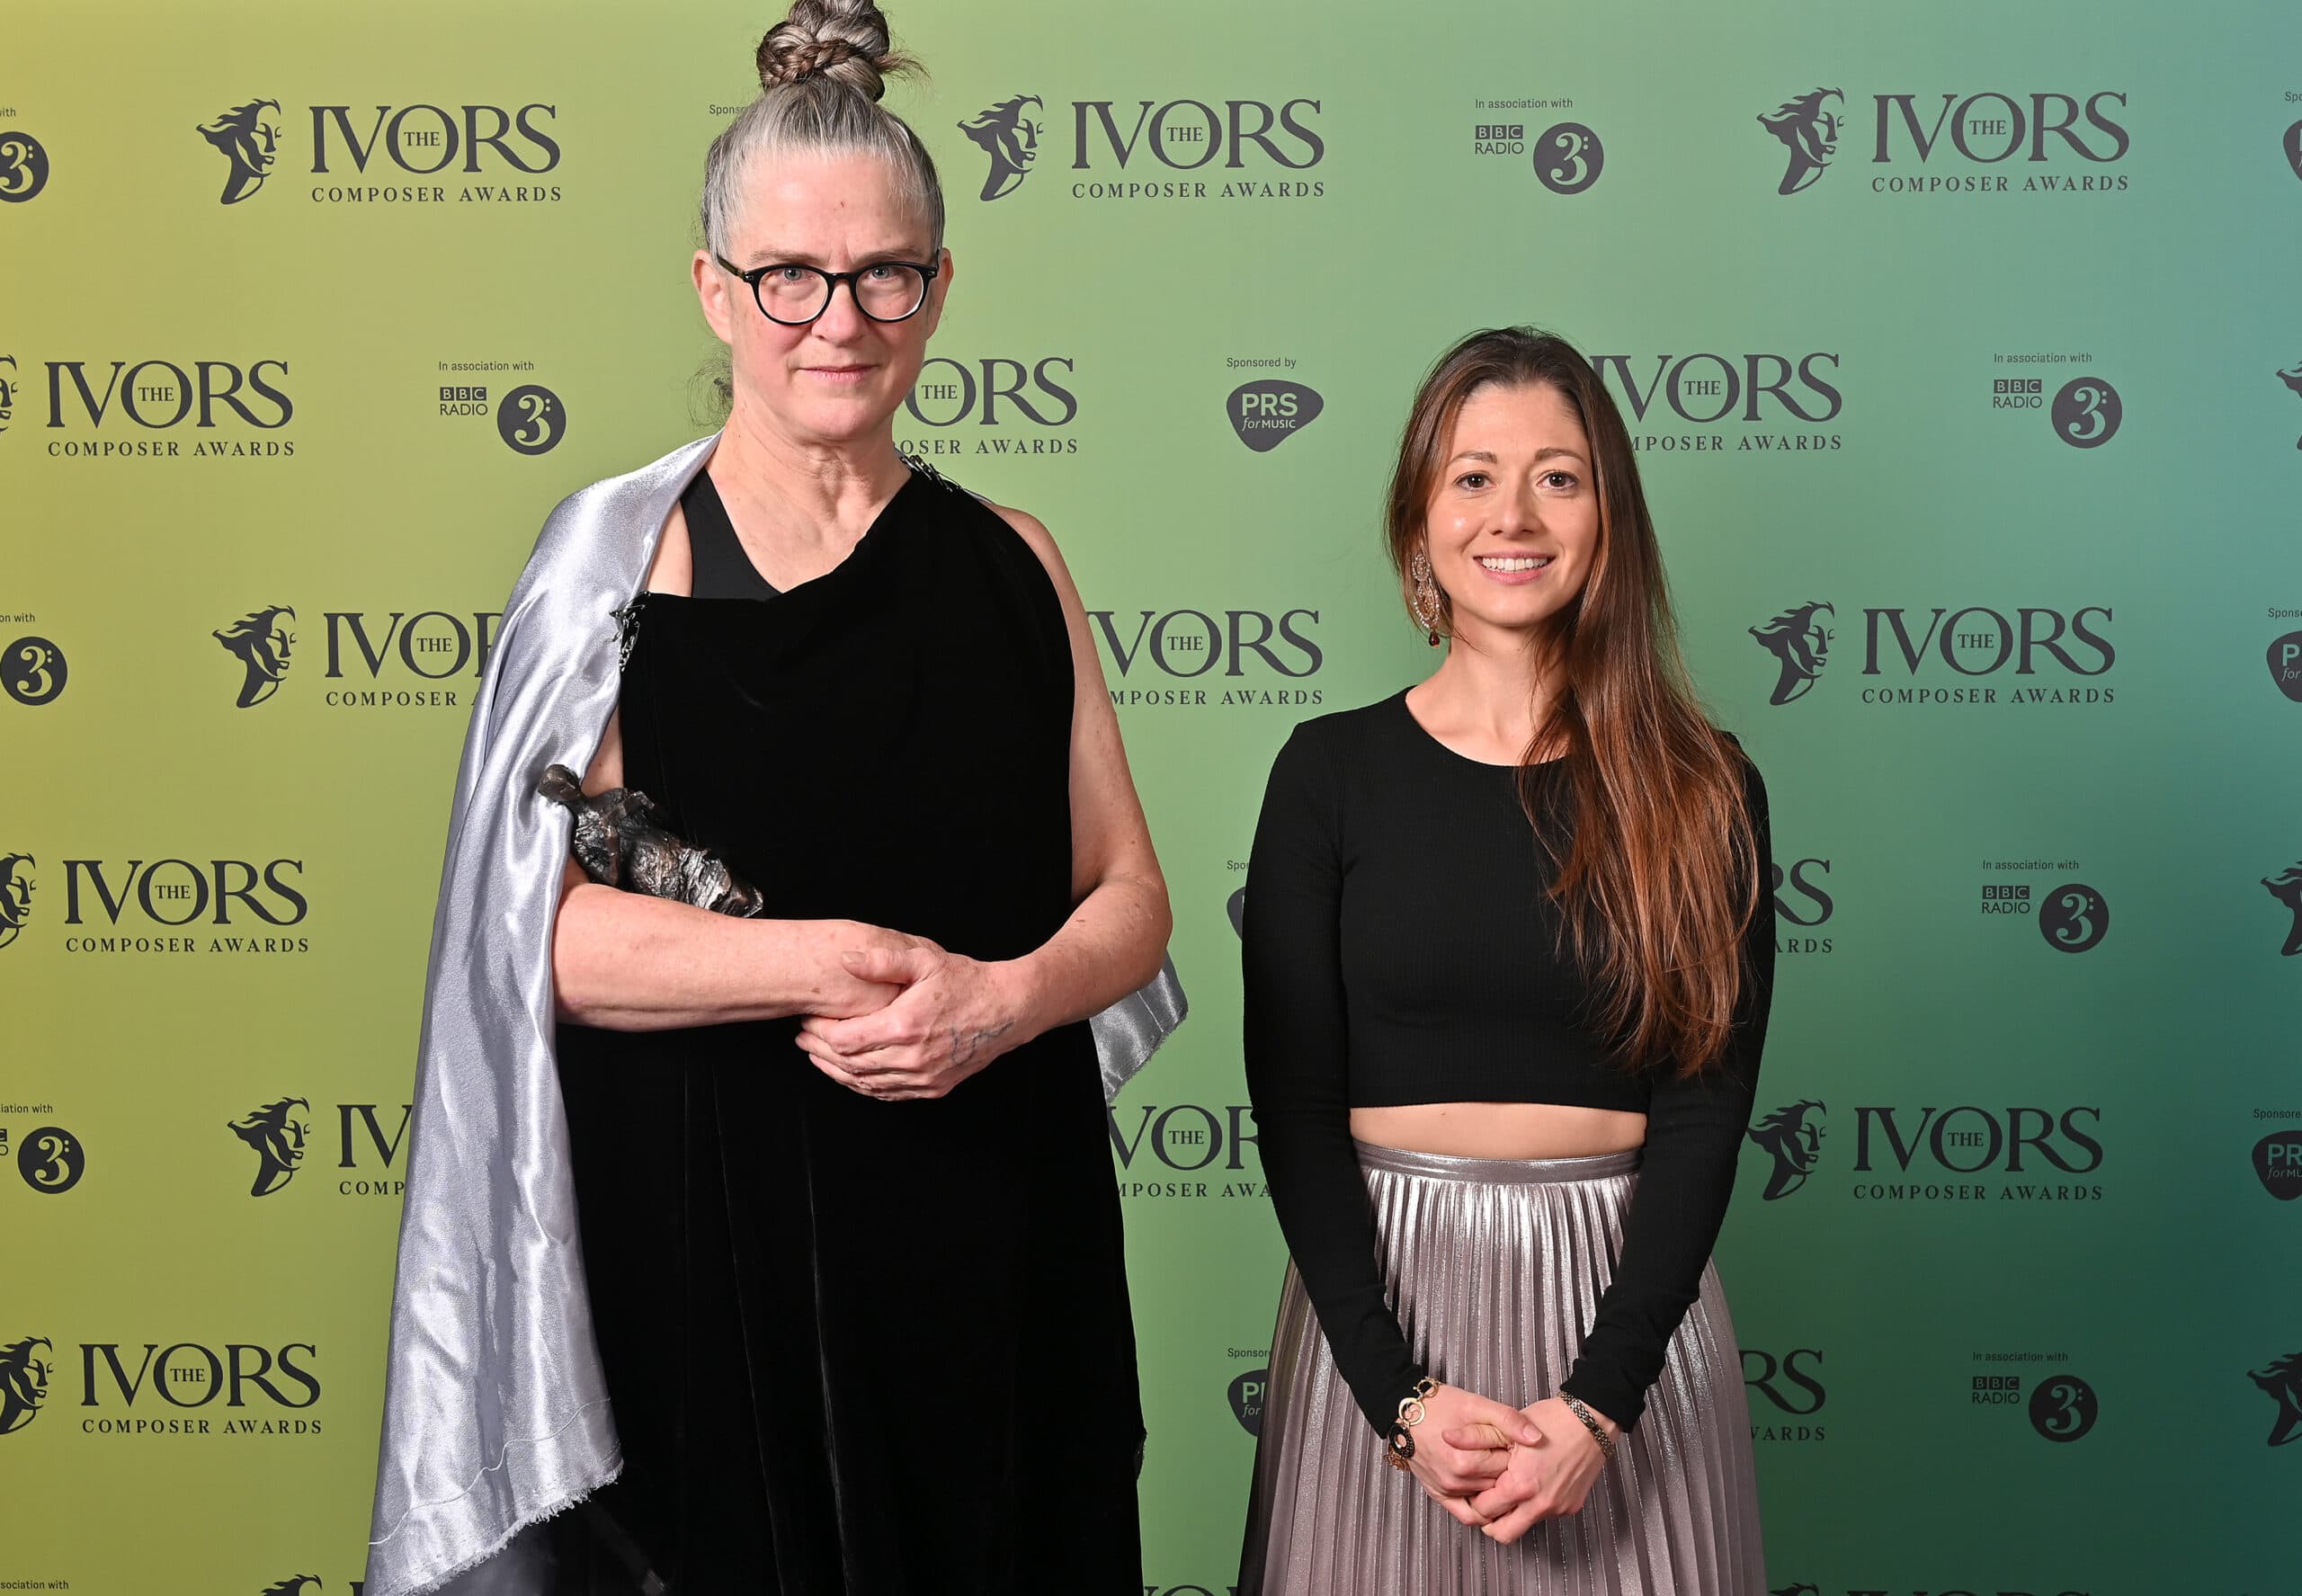 Yazz Ahmed presents the Sound Art Award to Caroline Kraabel at The Ivors Composer Awards in the British Museum on Wednesday 8 December 2021